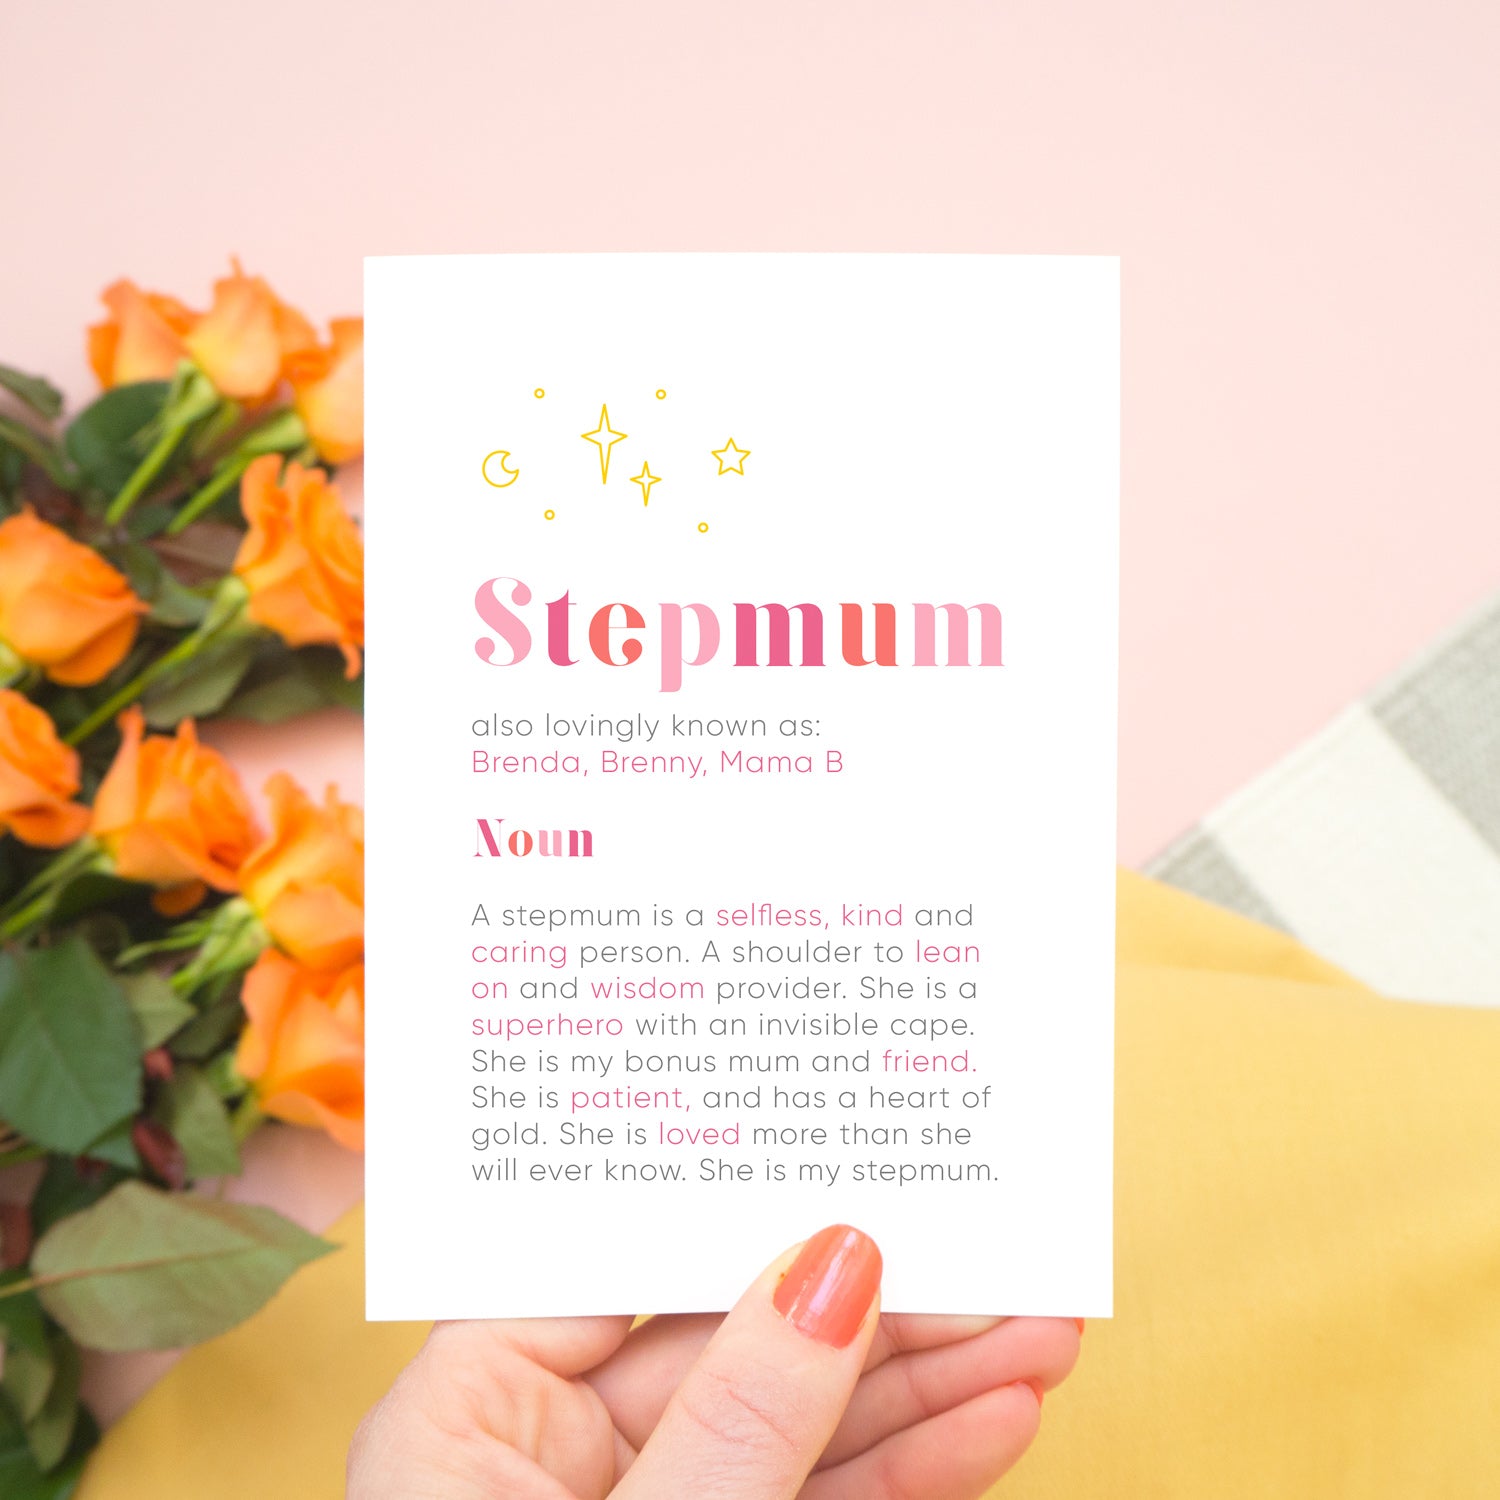 A personalised Stepmum dictionary definition card being held over a pink background with a grey and white striped rug, yellow skirt and a bunch of orange roses to the left. The card features hand drawn writing in varying tones of pink and a definition of what a Stepmum is with key words highlighted in pink.